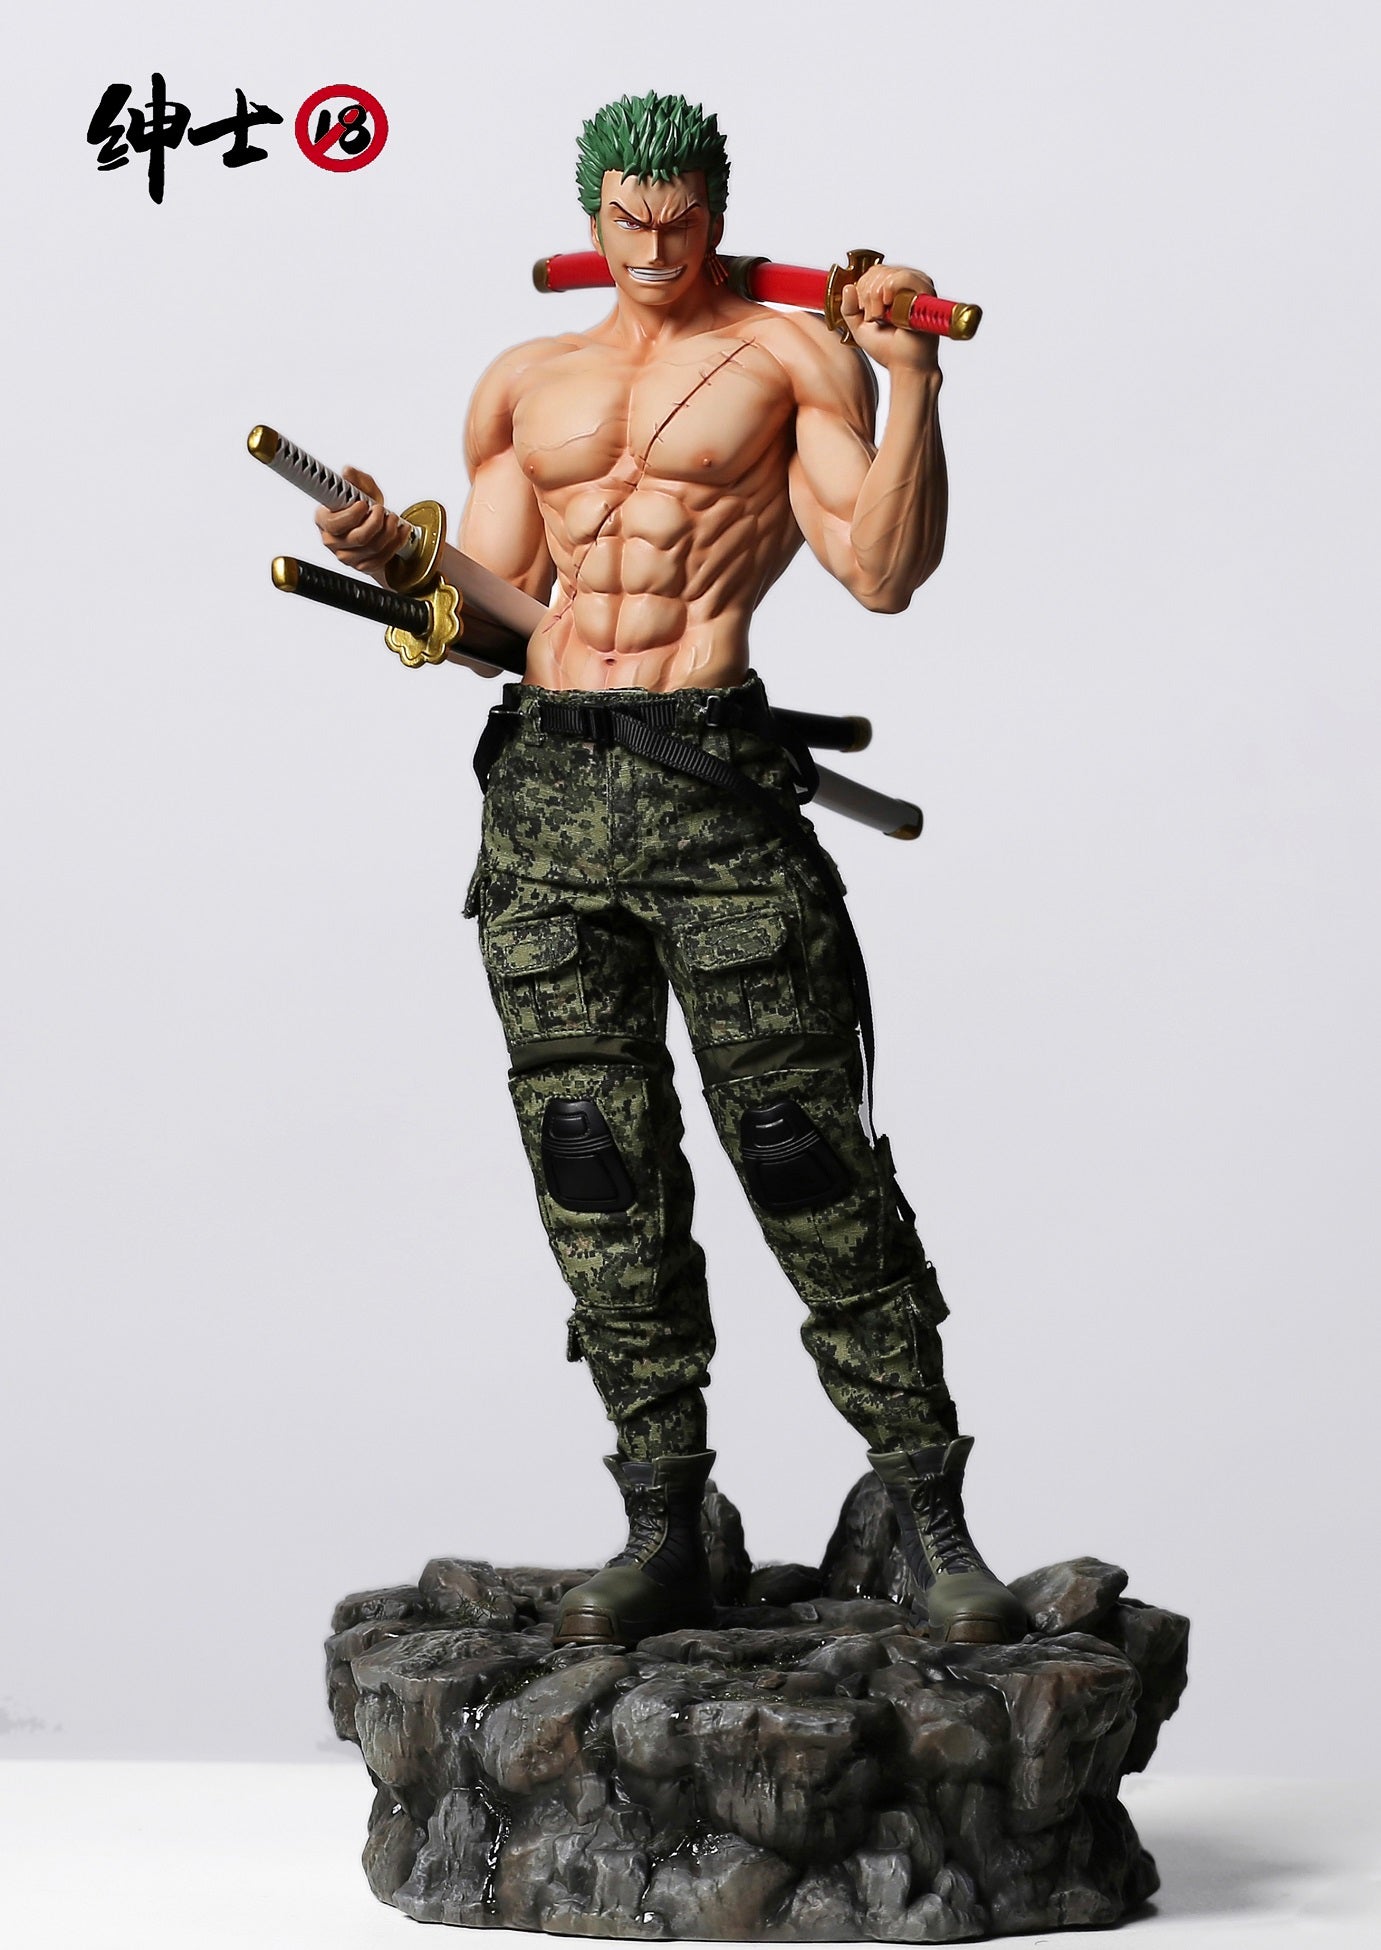 Gentlemen 18 Studio Product Category: Anime Action Figure, Statues, Collect...